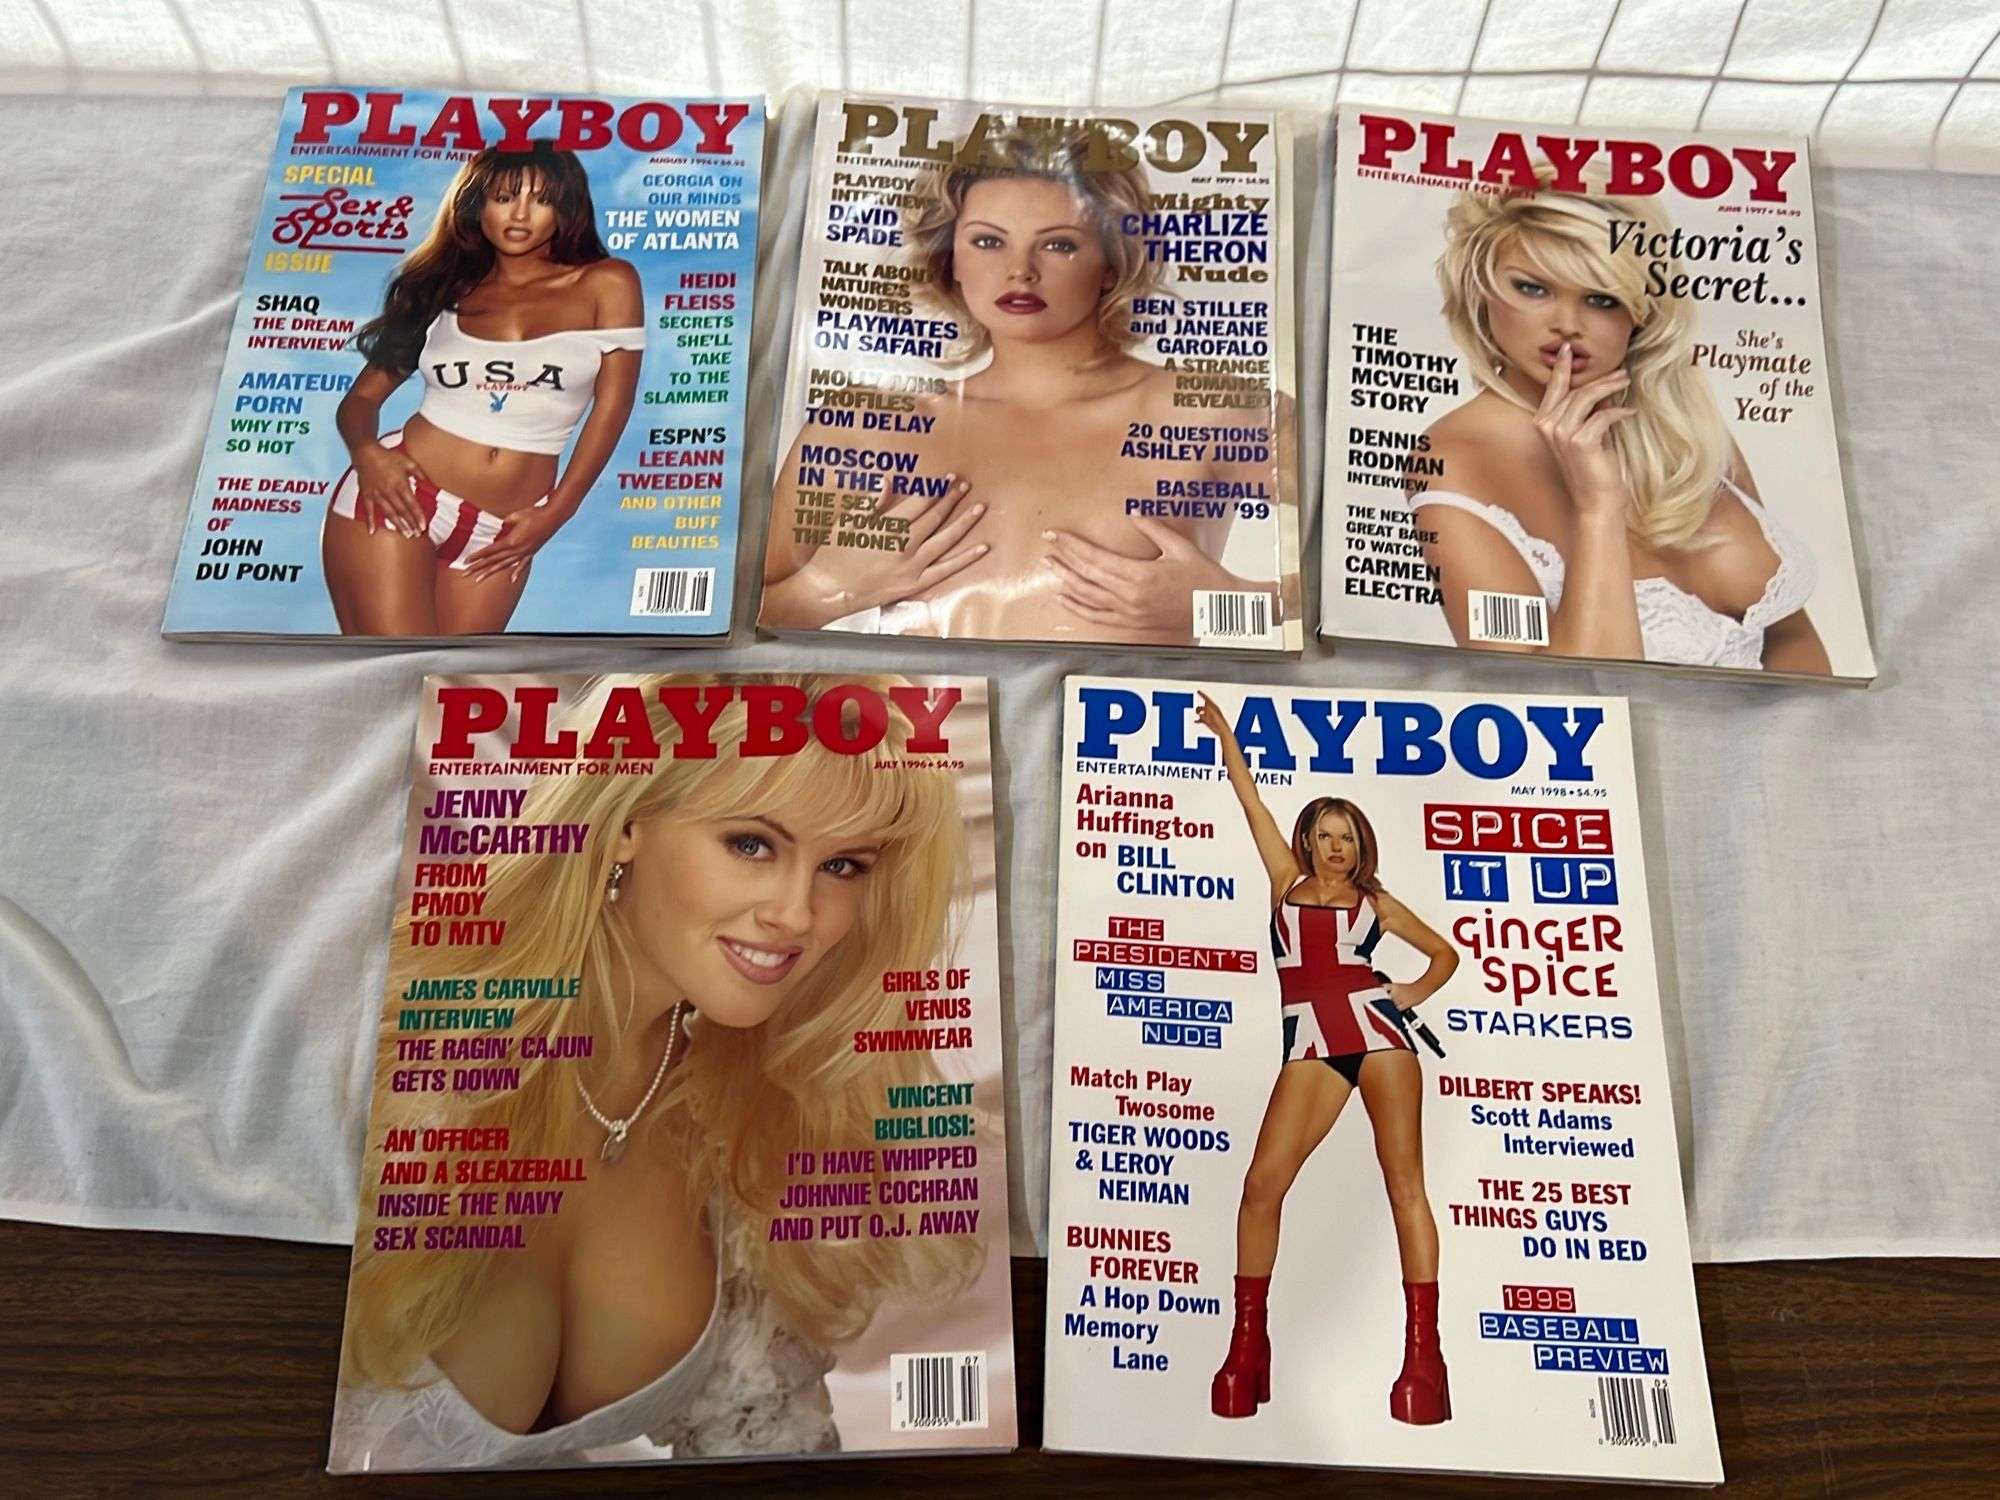 cesar marchan recommends charlize theron playboy pic pic